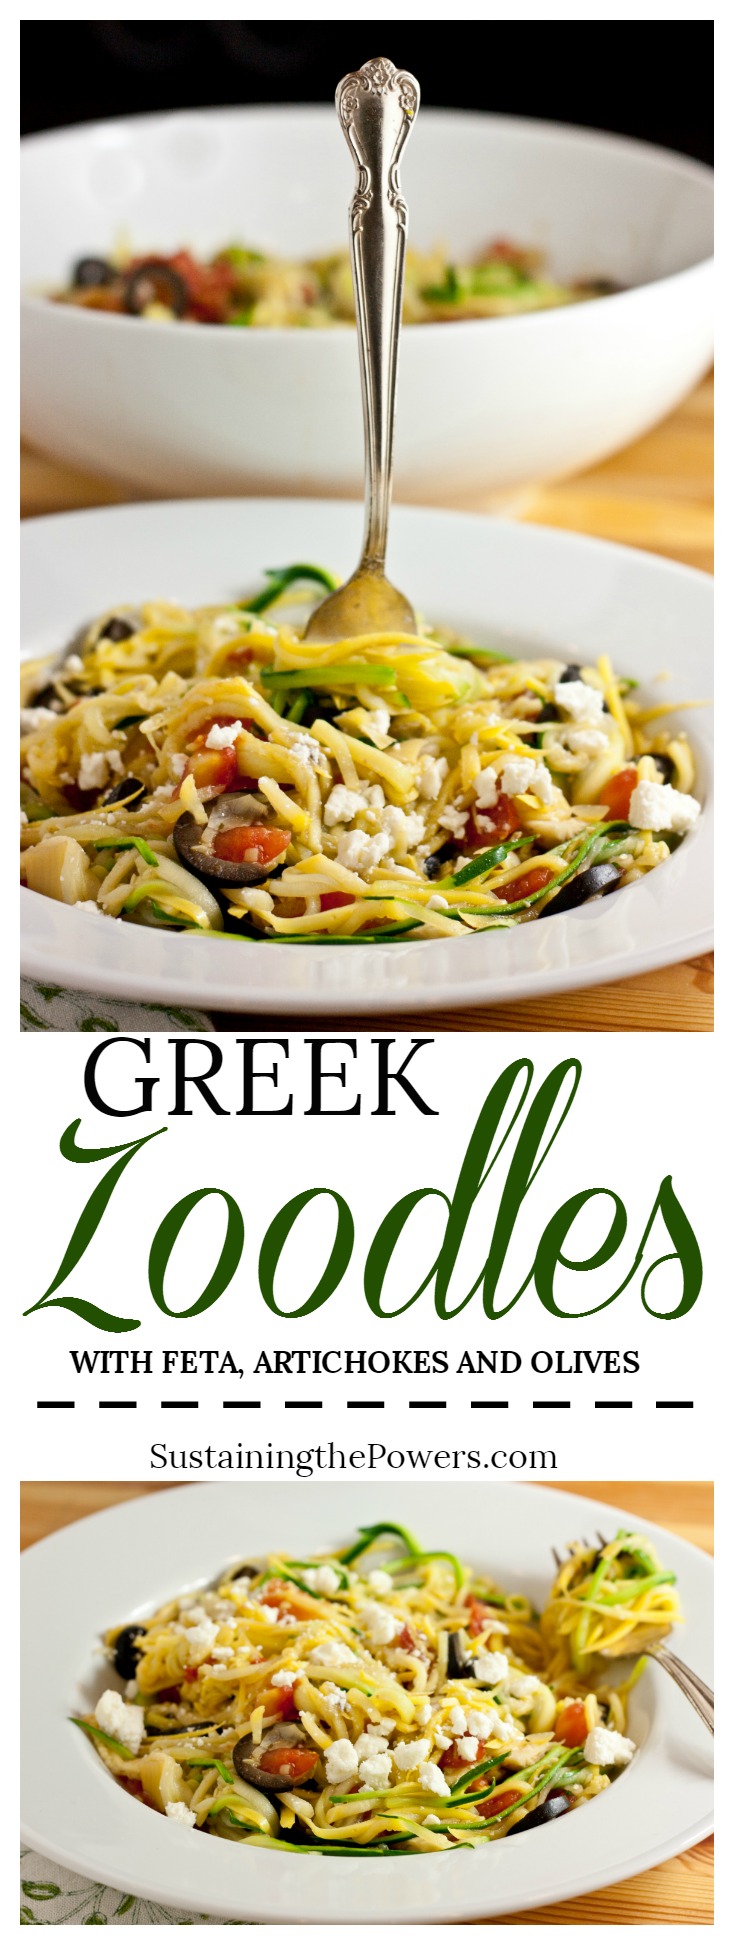 How to Make Greek Zucchini Noodles | These zoodles are one of my most popular recipes. They taste like an indulgent pasta dish, but the spiralized zucchini noodles mean this is packed full of gluten-free veggies instead! Click through now to get the recipe!